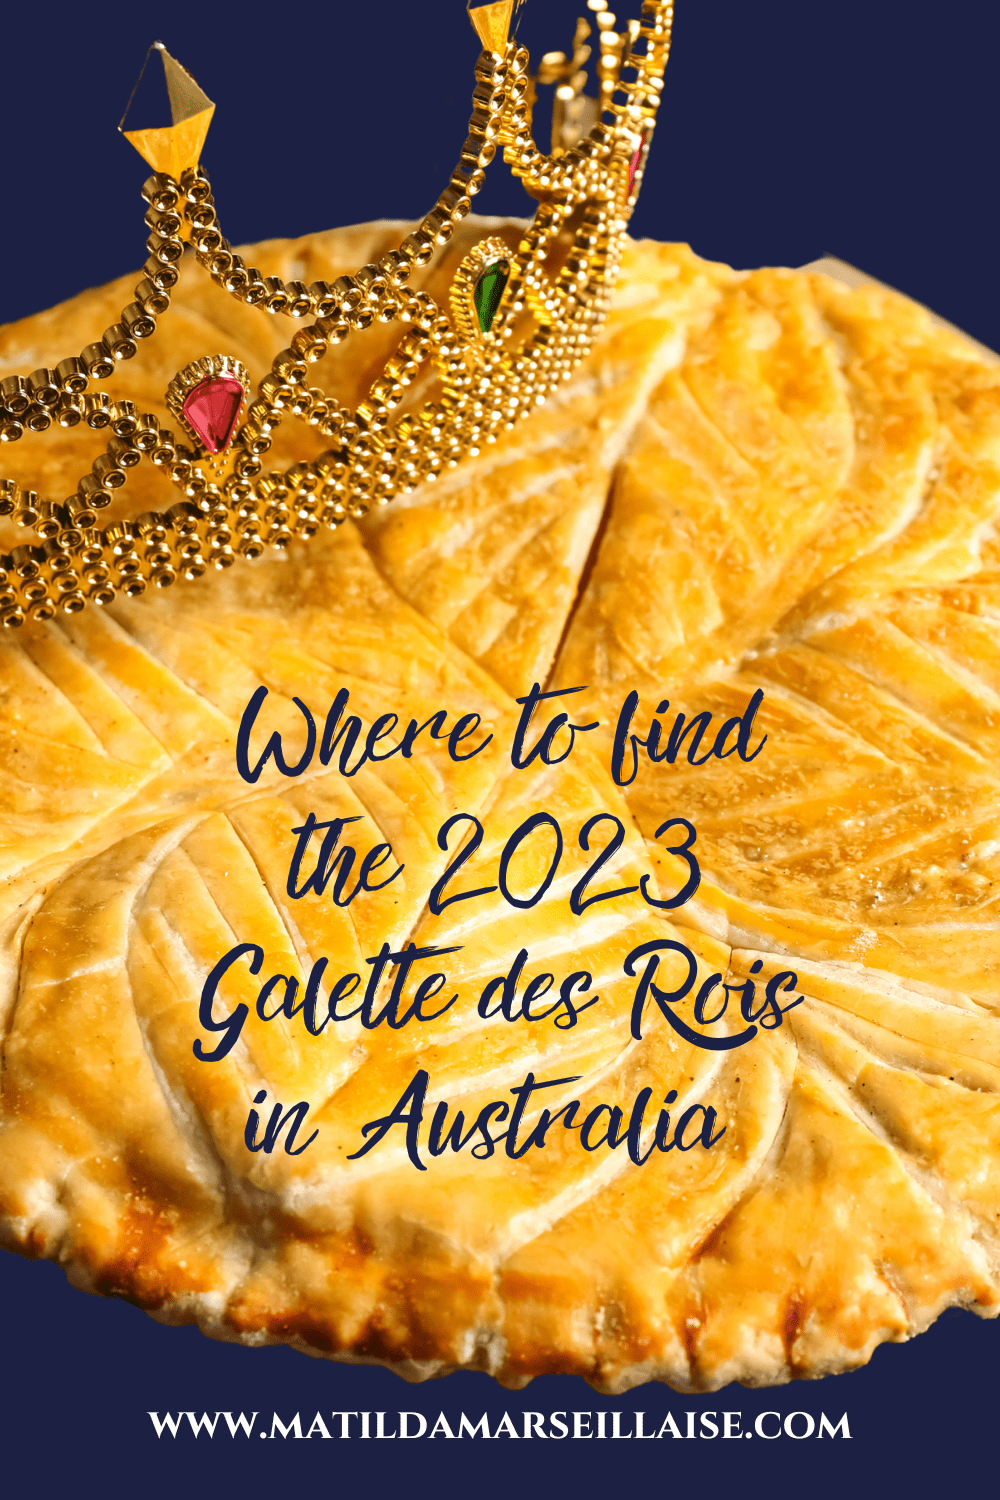 It’s time for the 2023 Galette des Rois!